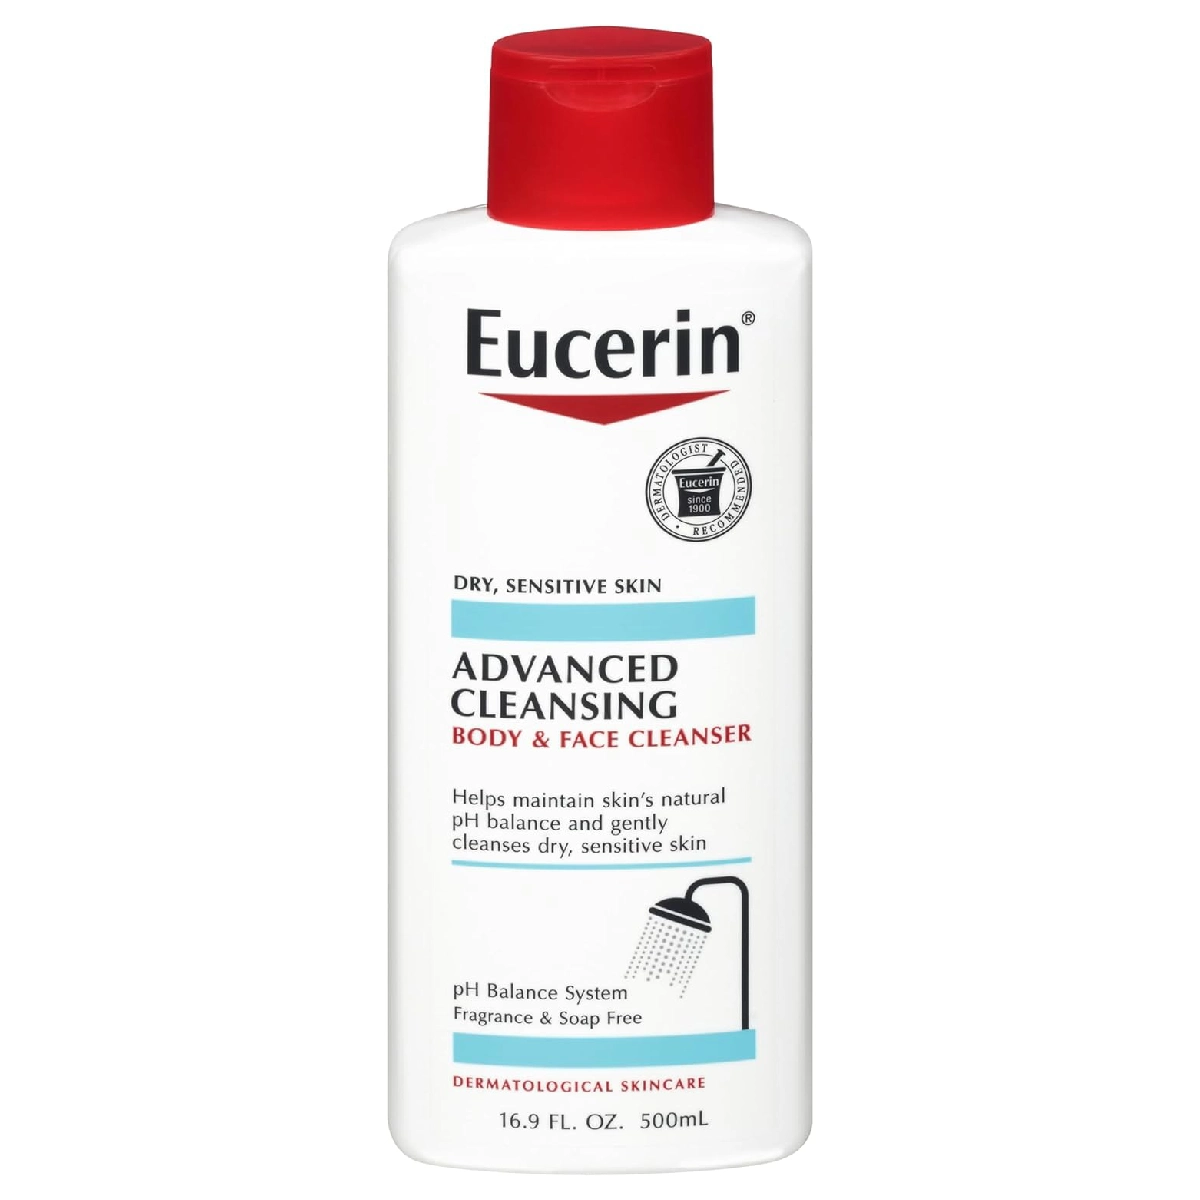 Eucerin Advanced Cleansing Body and Face Cleanser against a white background